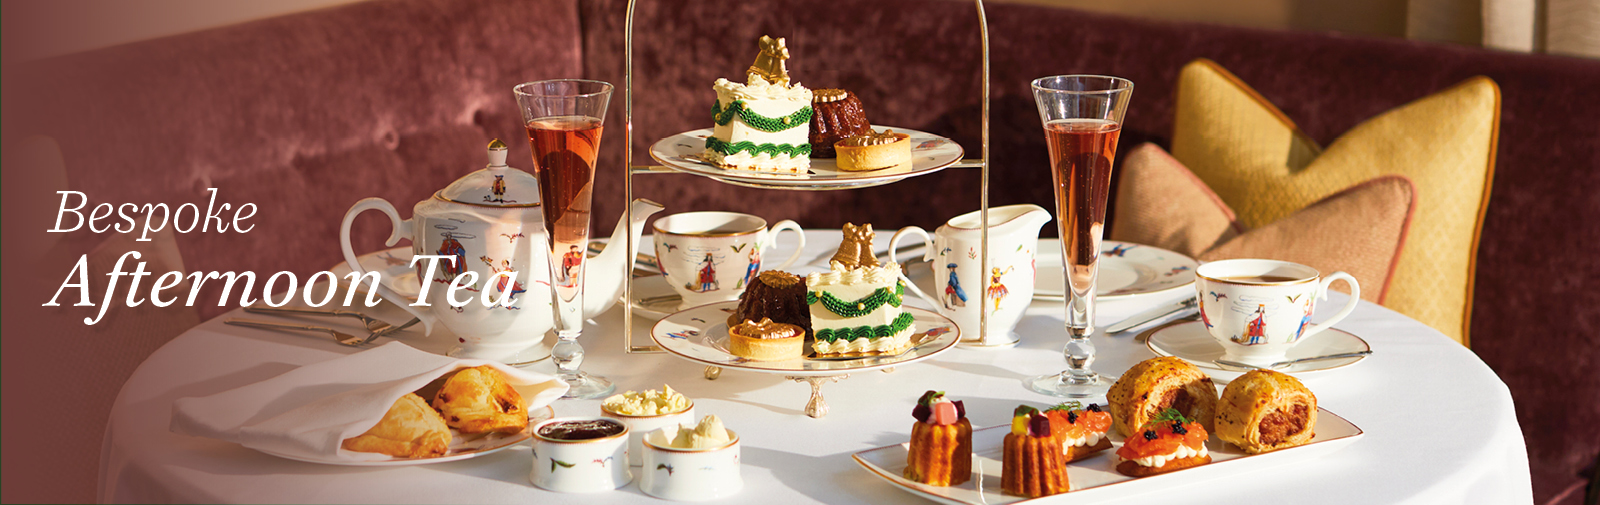 Specially-commissioned Afternoon Tea set exclusively for Theatre Royal Drury Lane